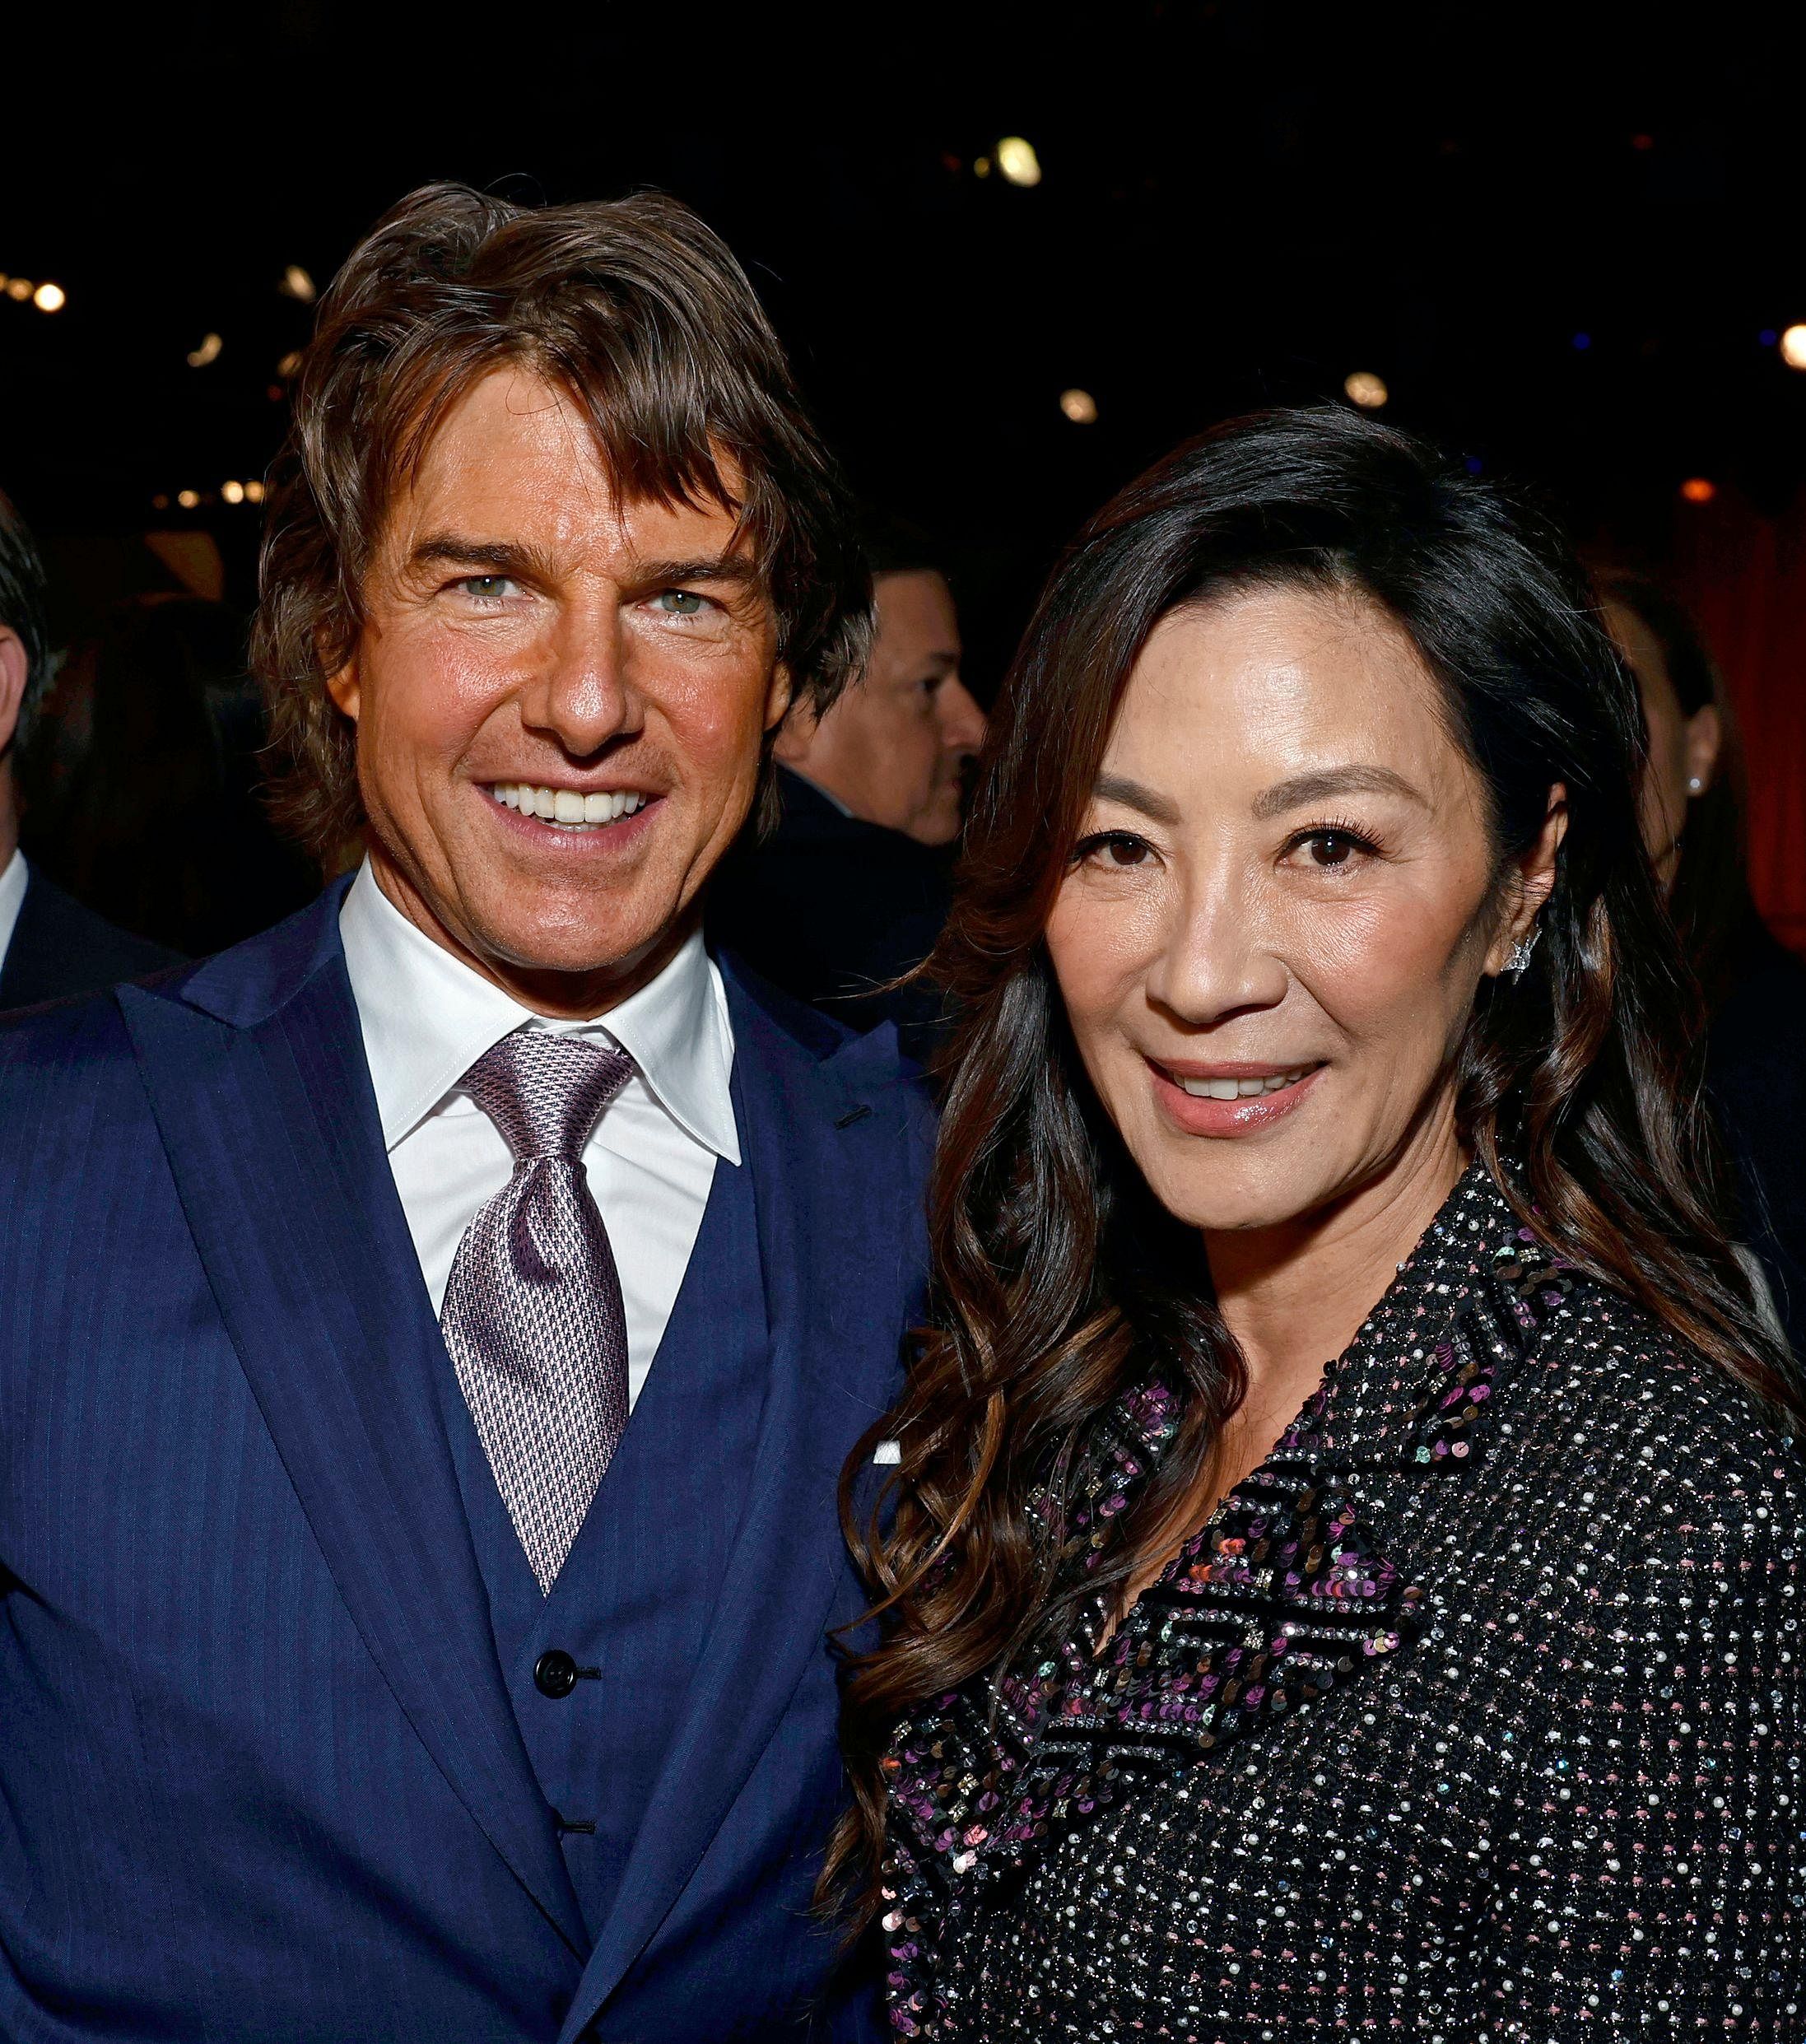 Tom Cruise outshines rivals at Oscars luncheon, Latest Movies News - The  New Paper